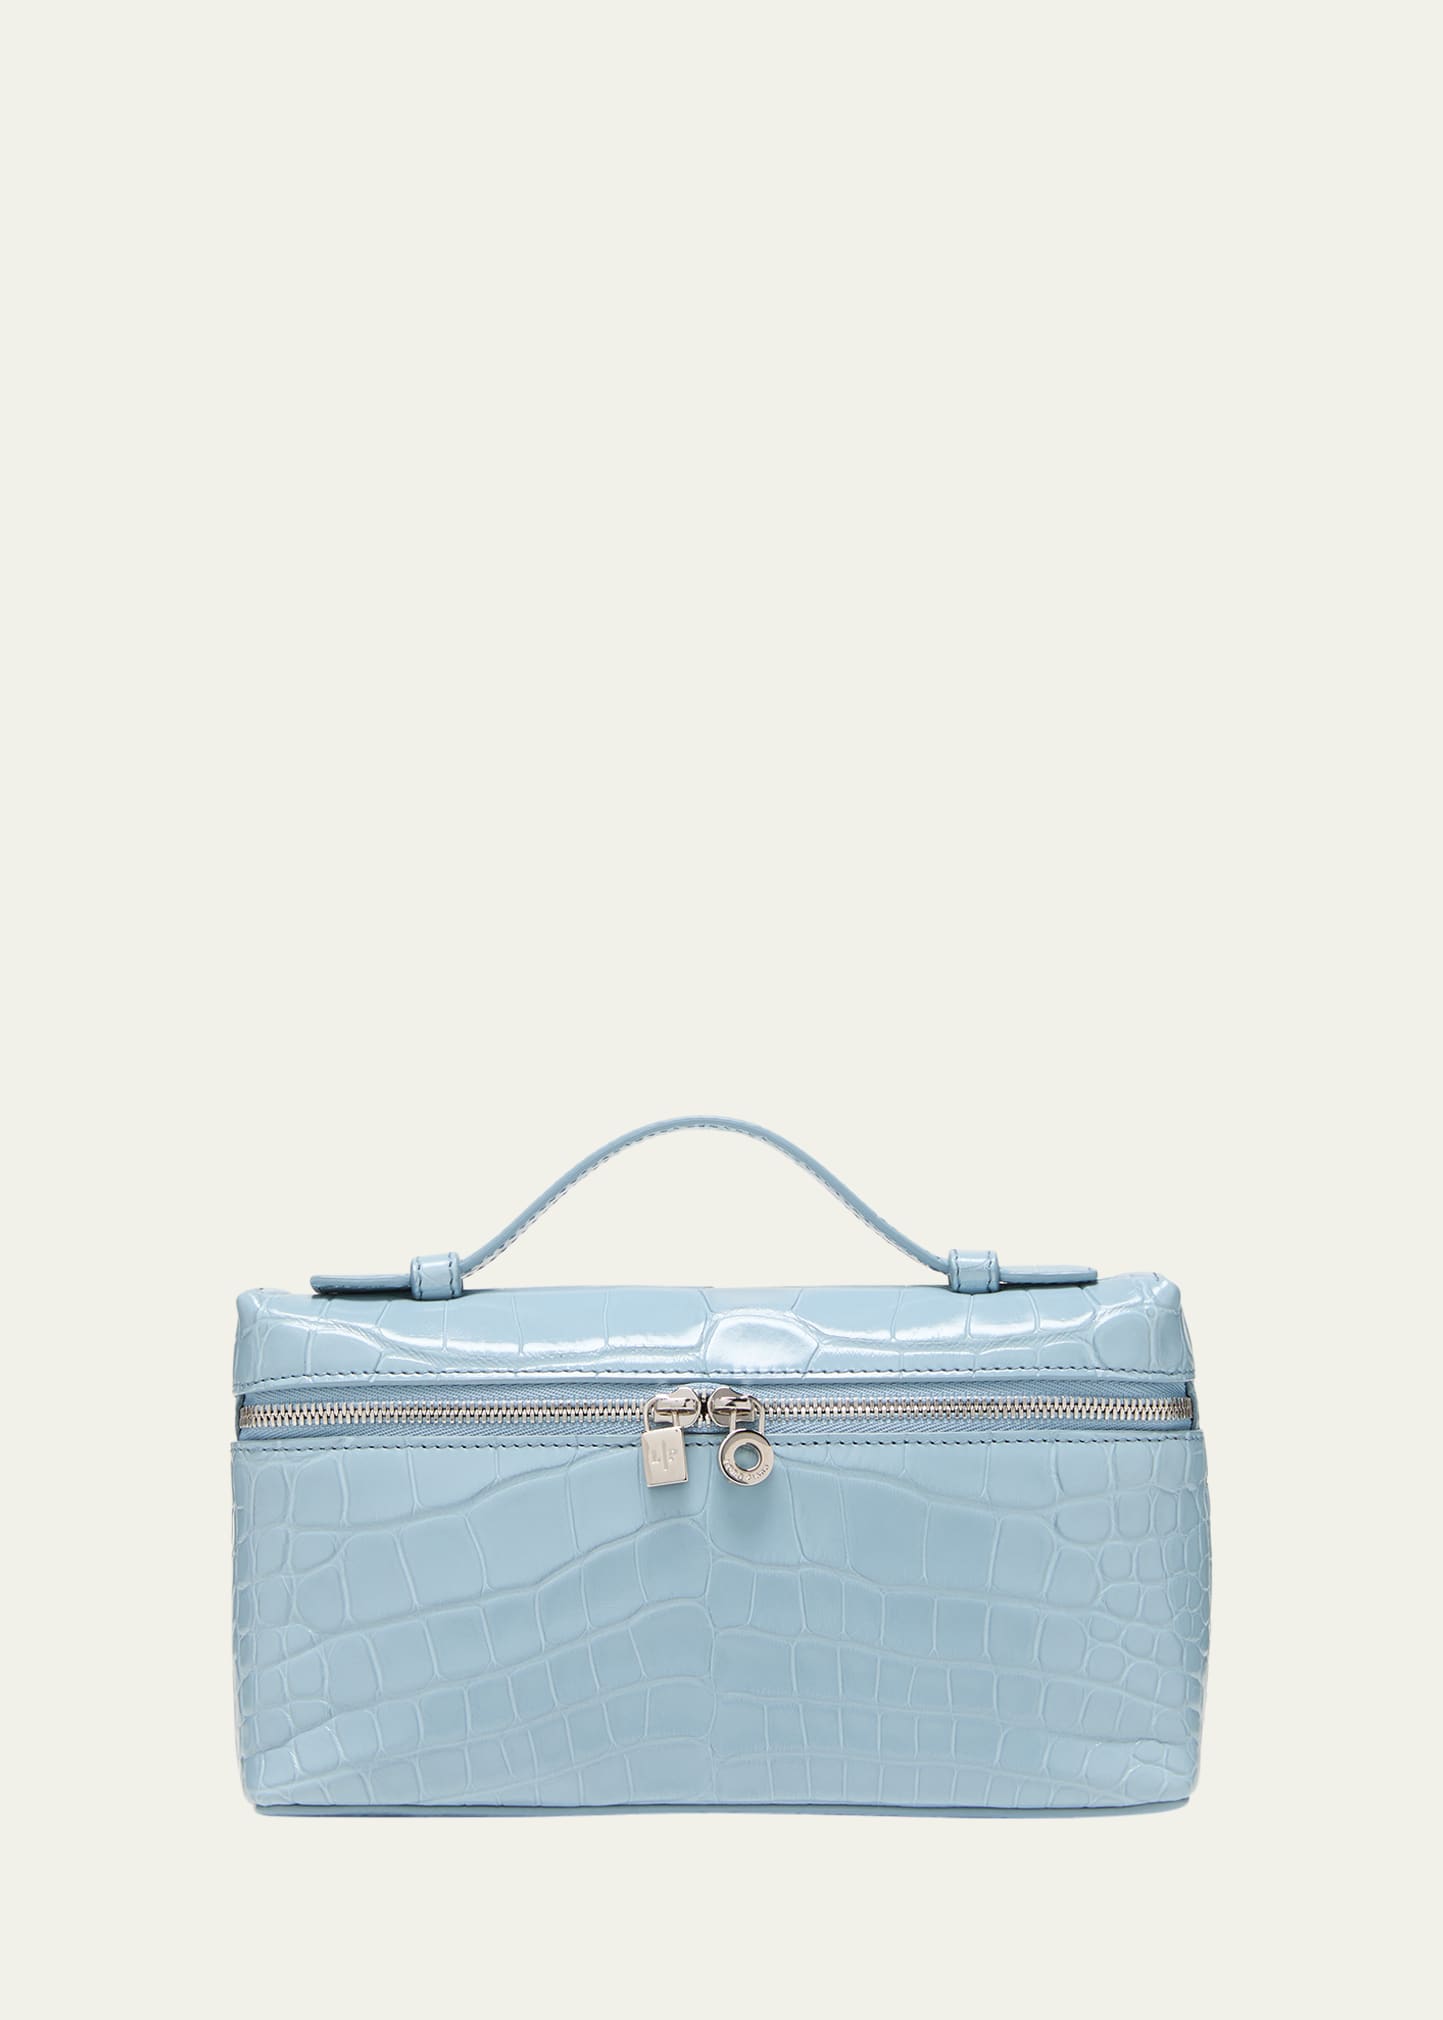 Extra Pocket L19 Pouch Bag In Light Blue